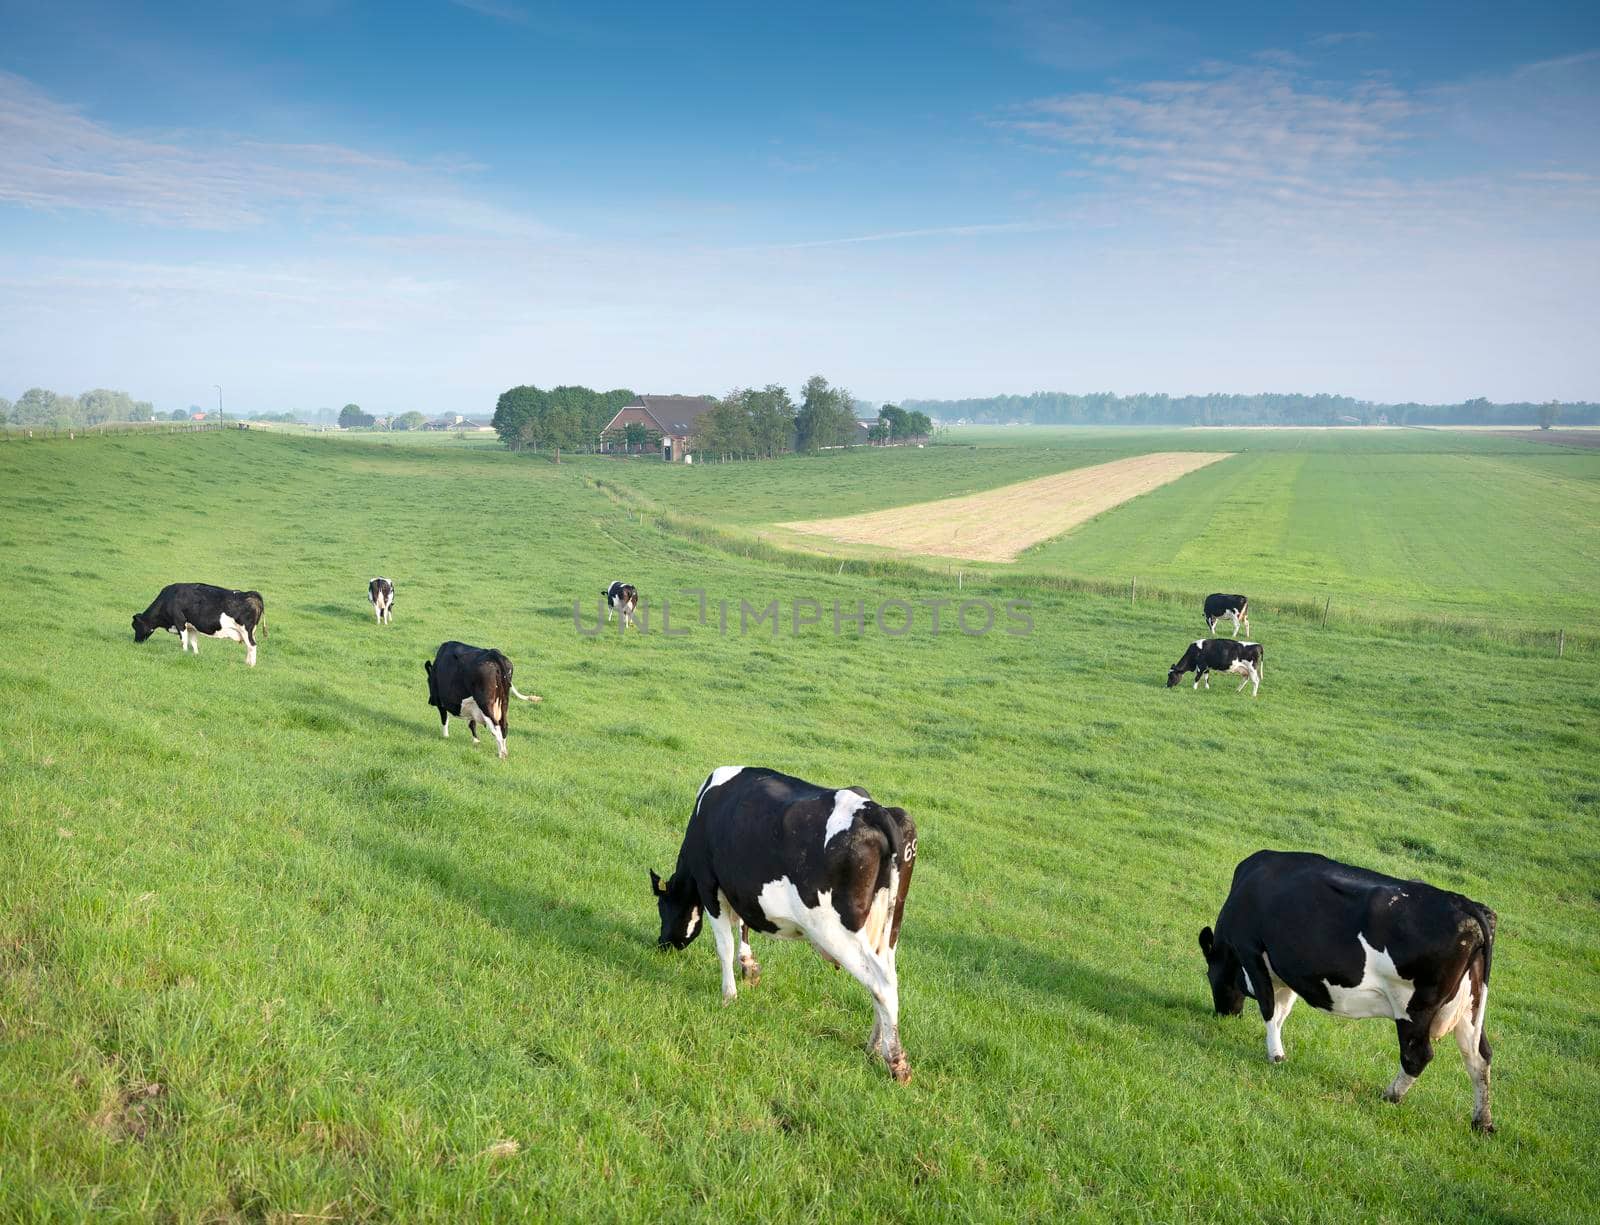 black and white spotted cows in green grassy meadow near farm under blue sky seen from height of dike in holland between utrecht and arnhem near river rhine